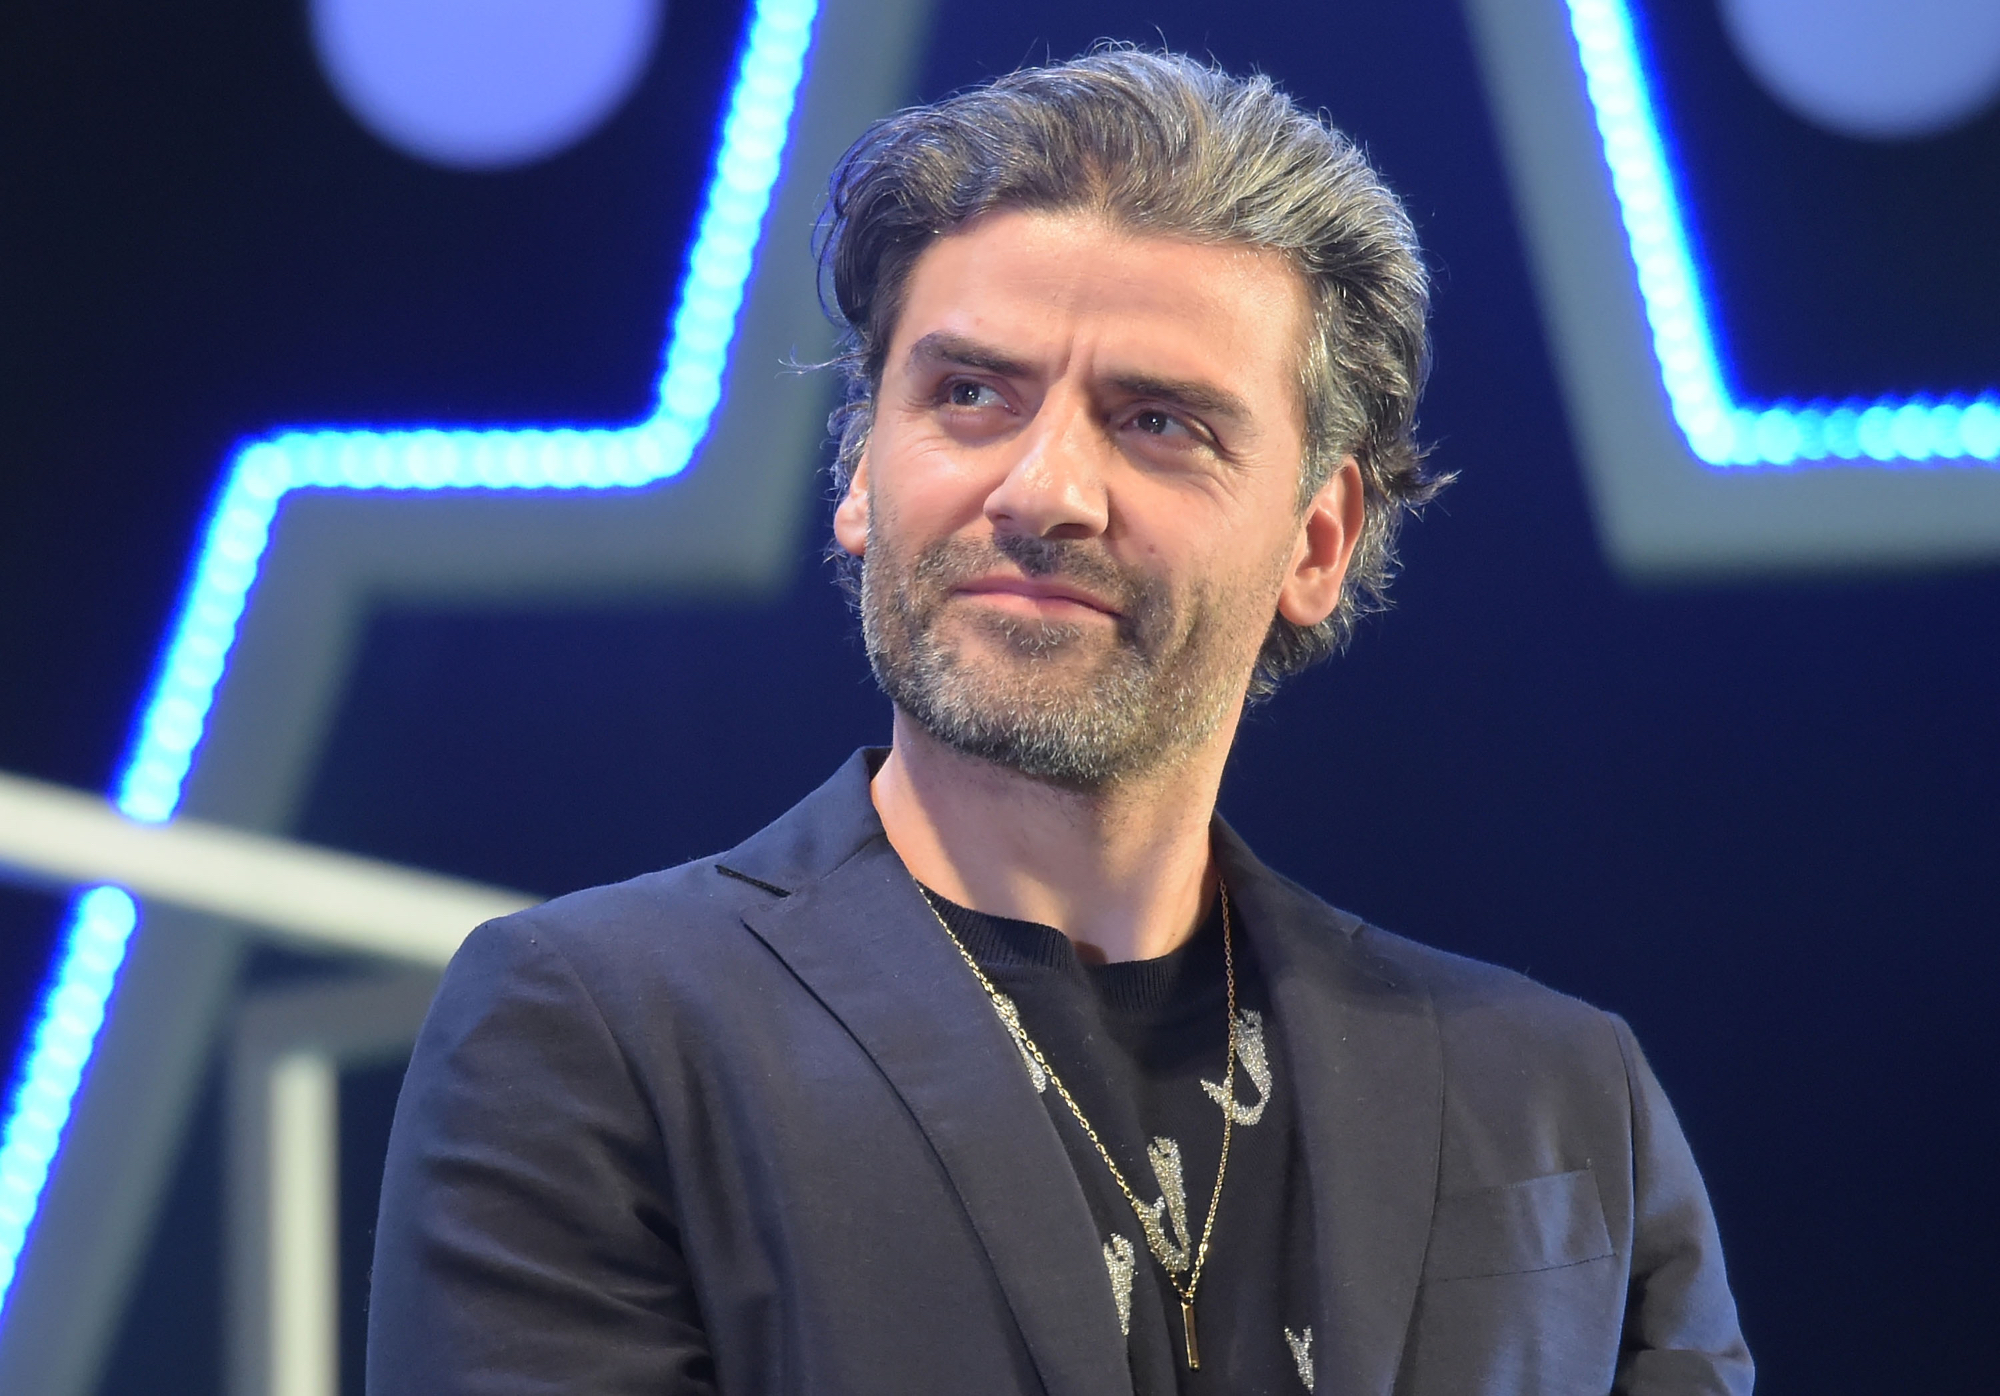 Oscar Isaac Almost Turned Down ‘Star Wars’ When He Discovered Poe Dameron’s Original Storyline